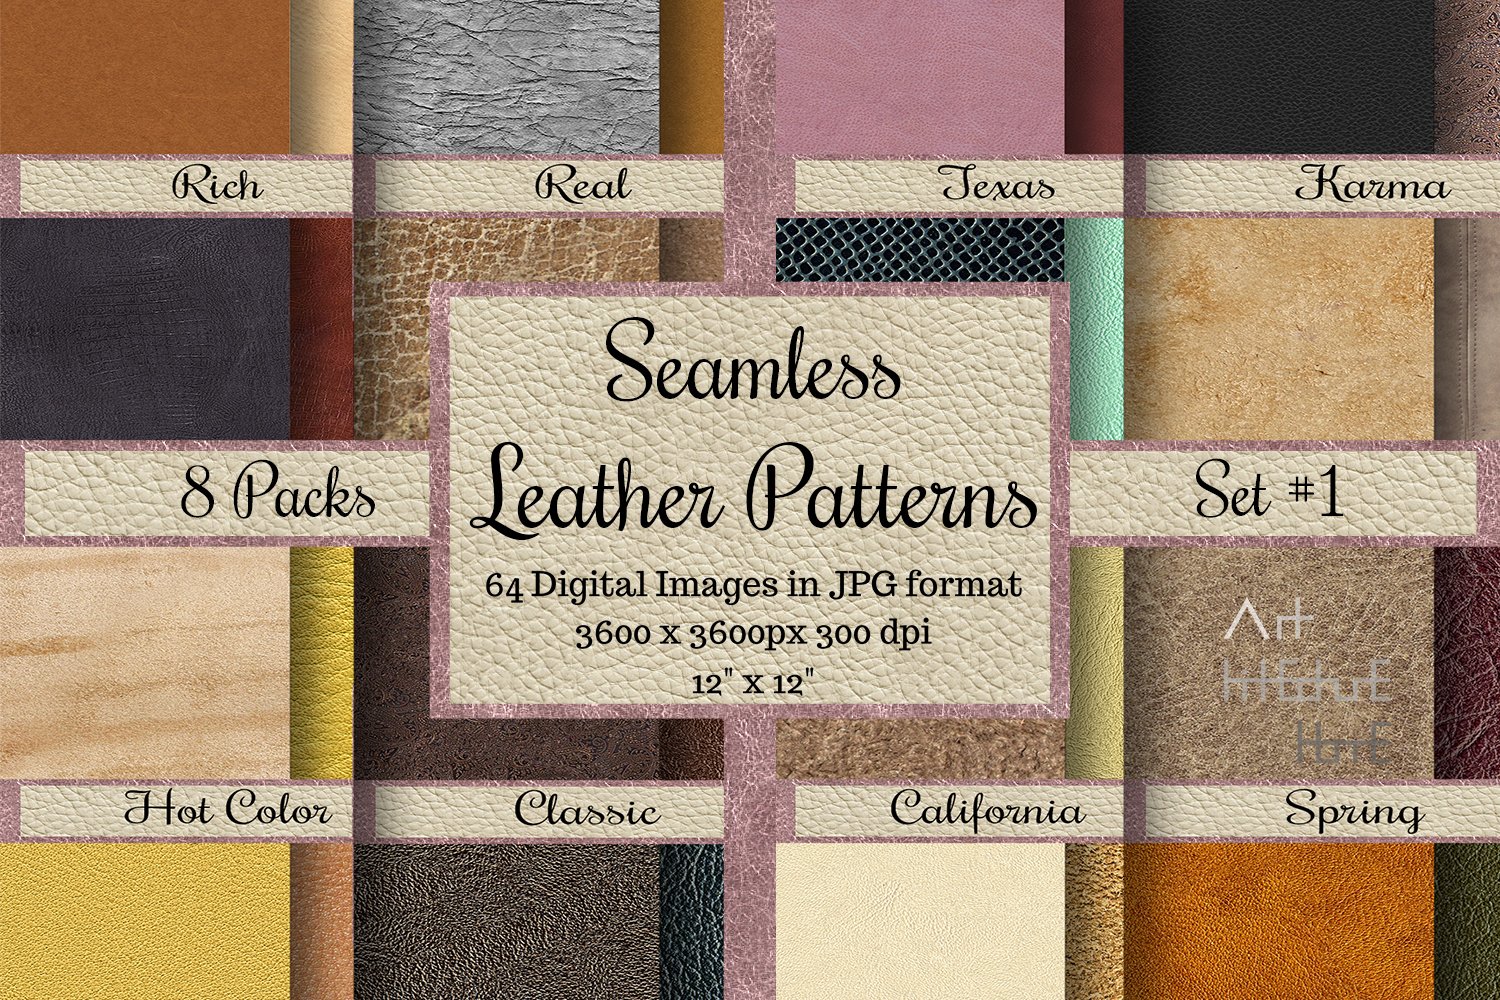 64 Seamless Leather Patterns Set 1 cover image.